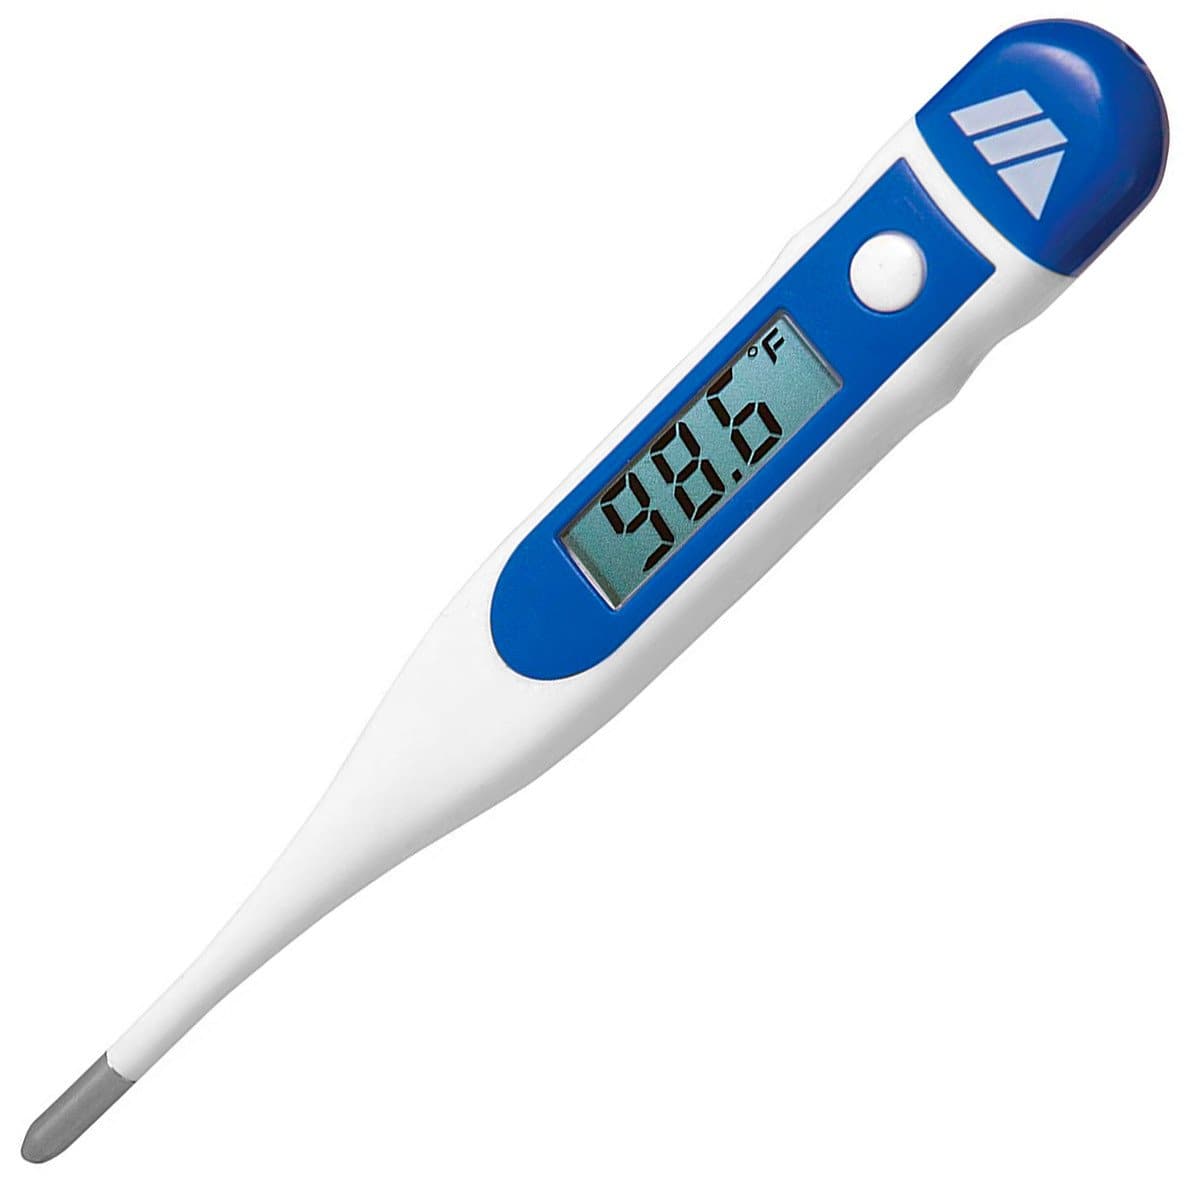 MABIS 9-Second Waterproof Digital Thermometer - Oral, Underarm or Rectal - Senior.com Digital Thermometers